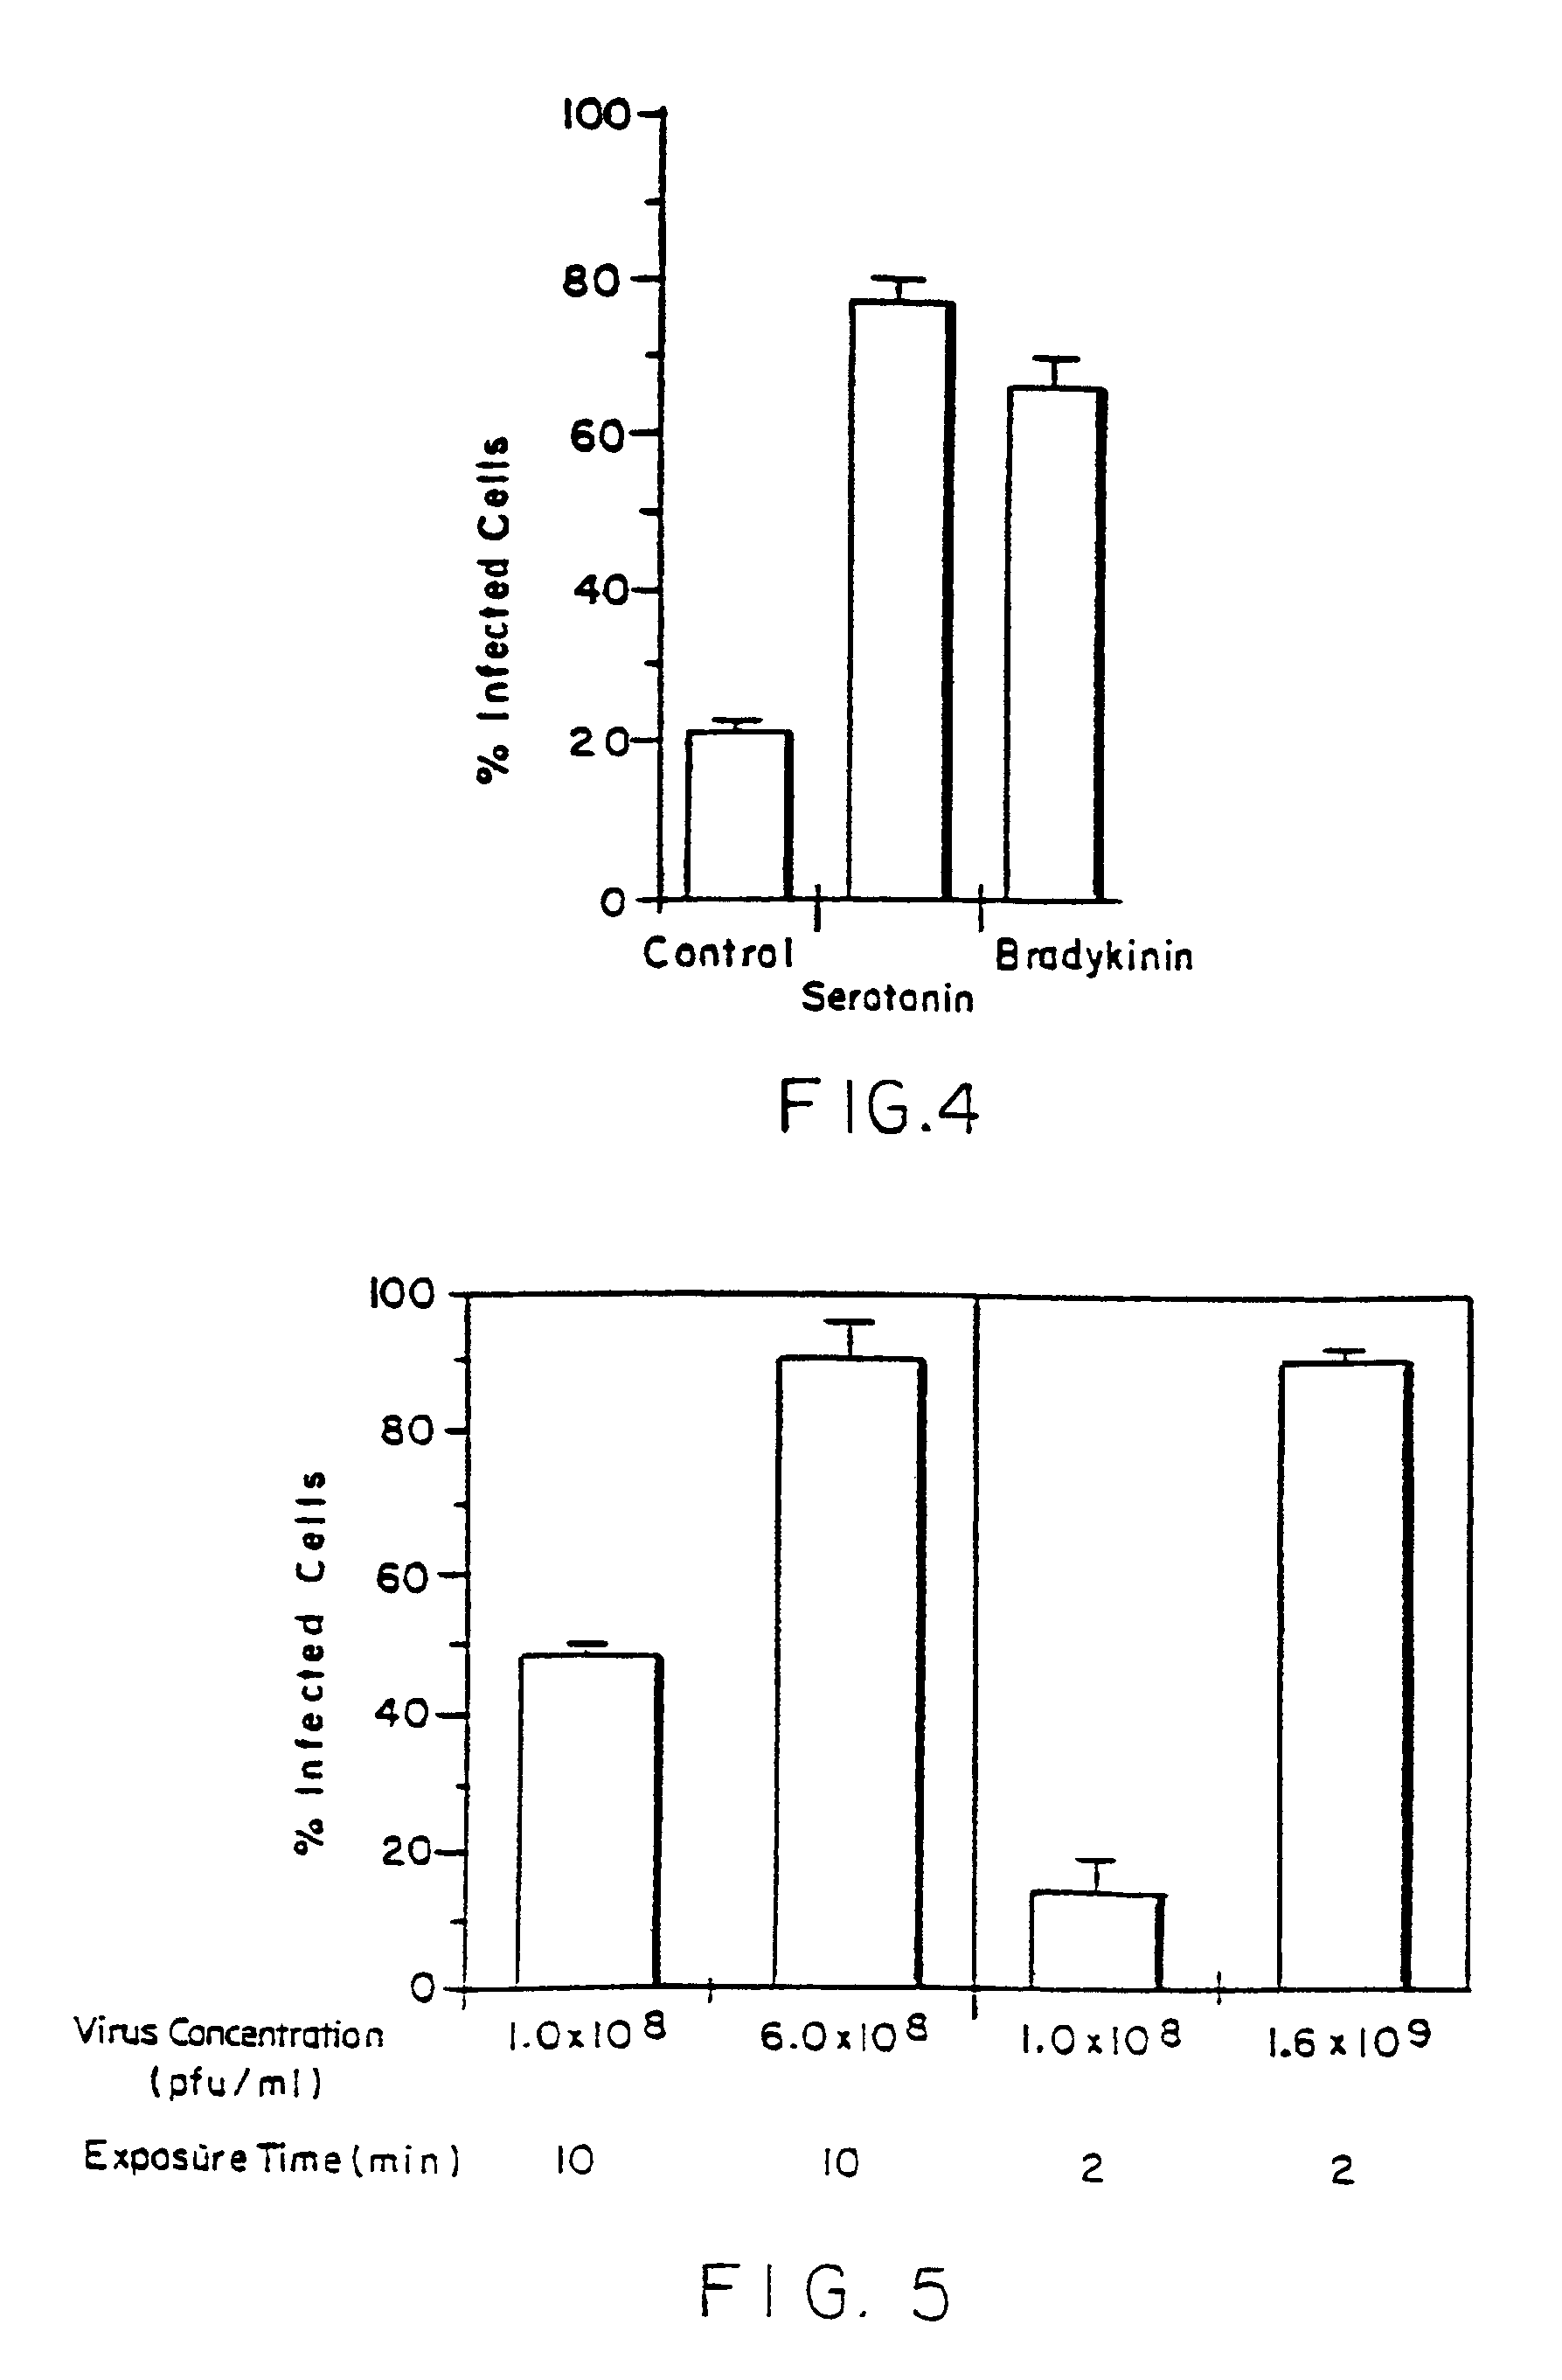 Gene delivery compositions and methods